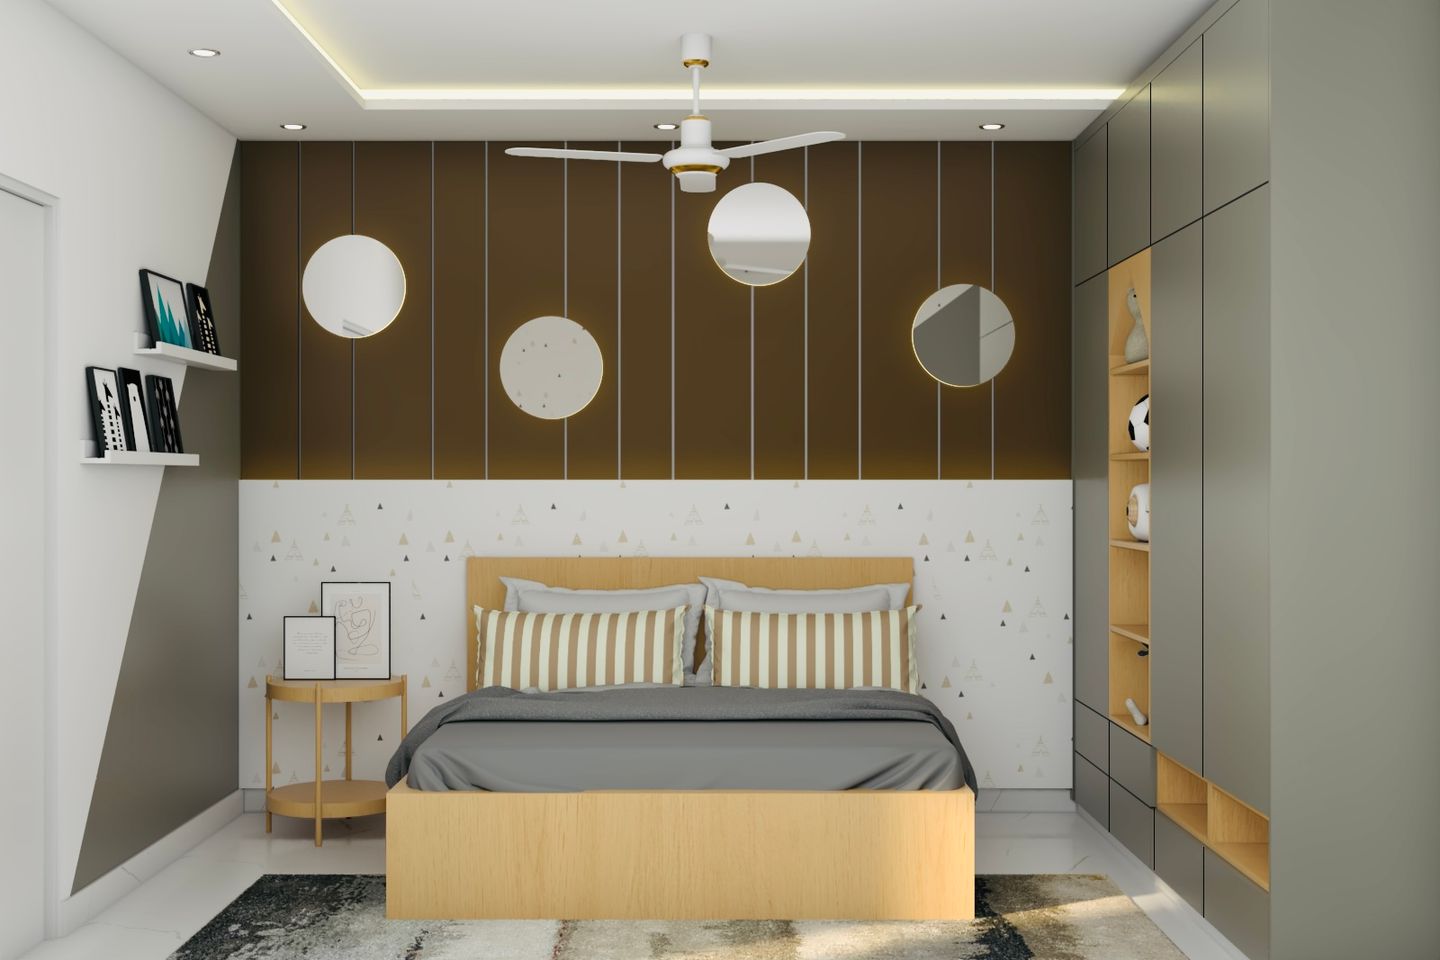 Kids Room Design With Wooden Bed And Swing Wardrobe - Livspace